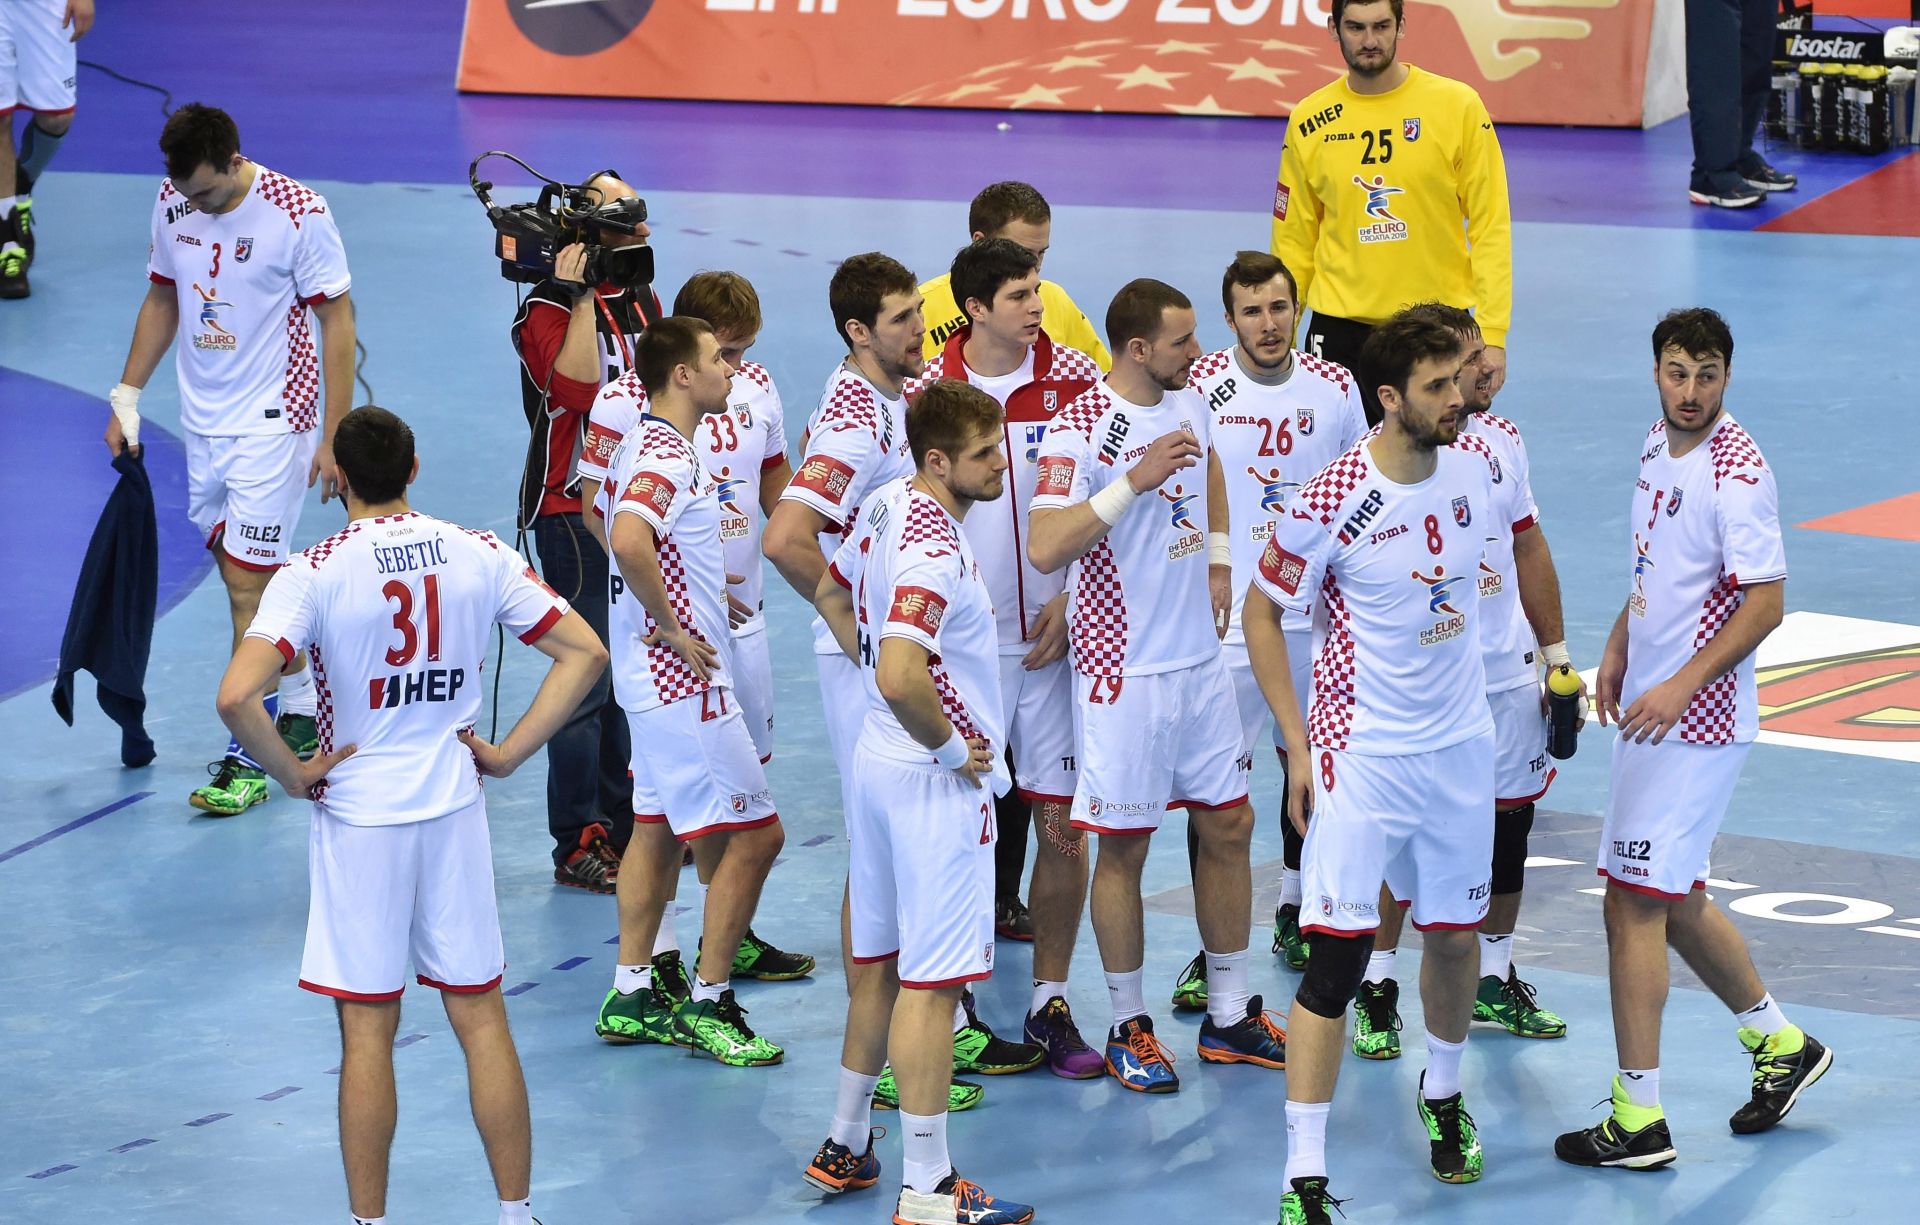 epa05134241 Croatian players react after losing the 2016 European Men's Handball Championship semi-final game between Croatia and Spain at the Tauron Arena in Krakow, Poland, 29 January 2016.  EPA/JACEK BEDNARCZYK POLAND OUT